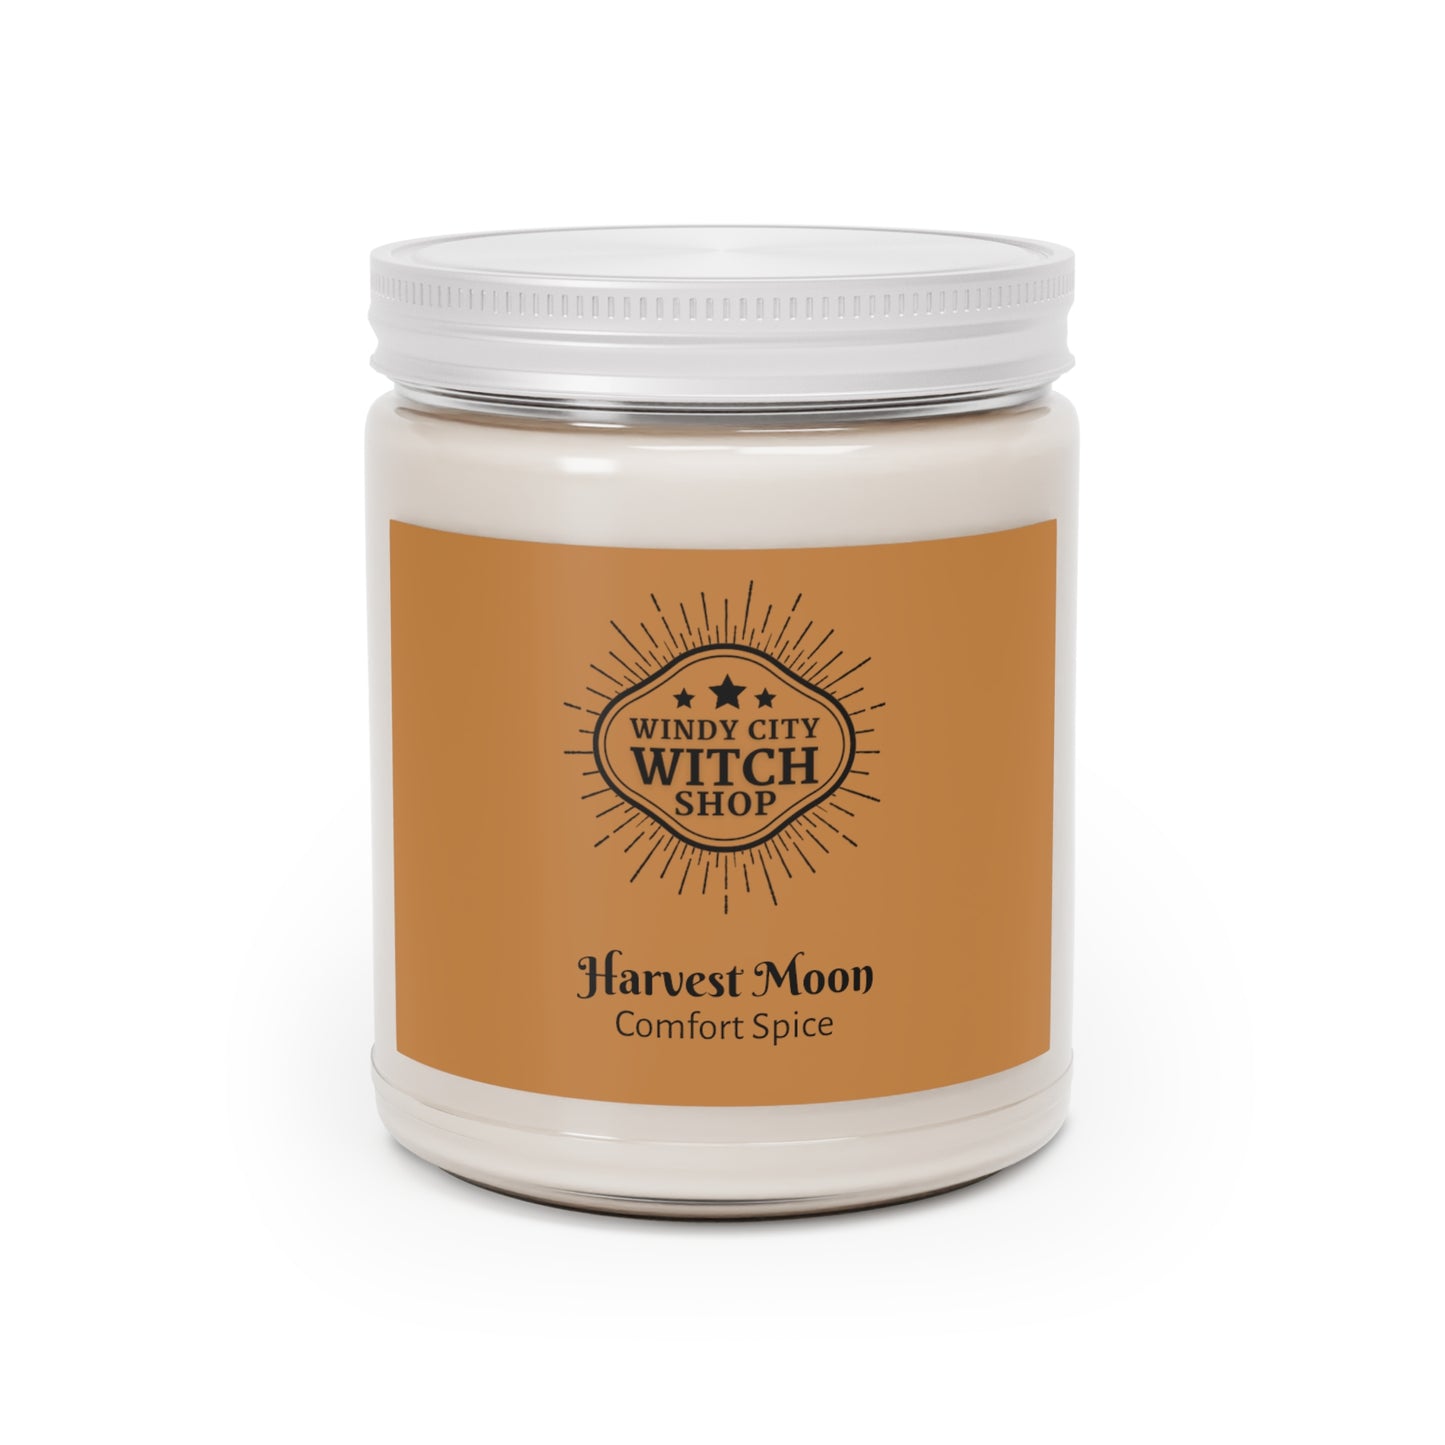 Harvest Moon candle, scented